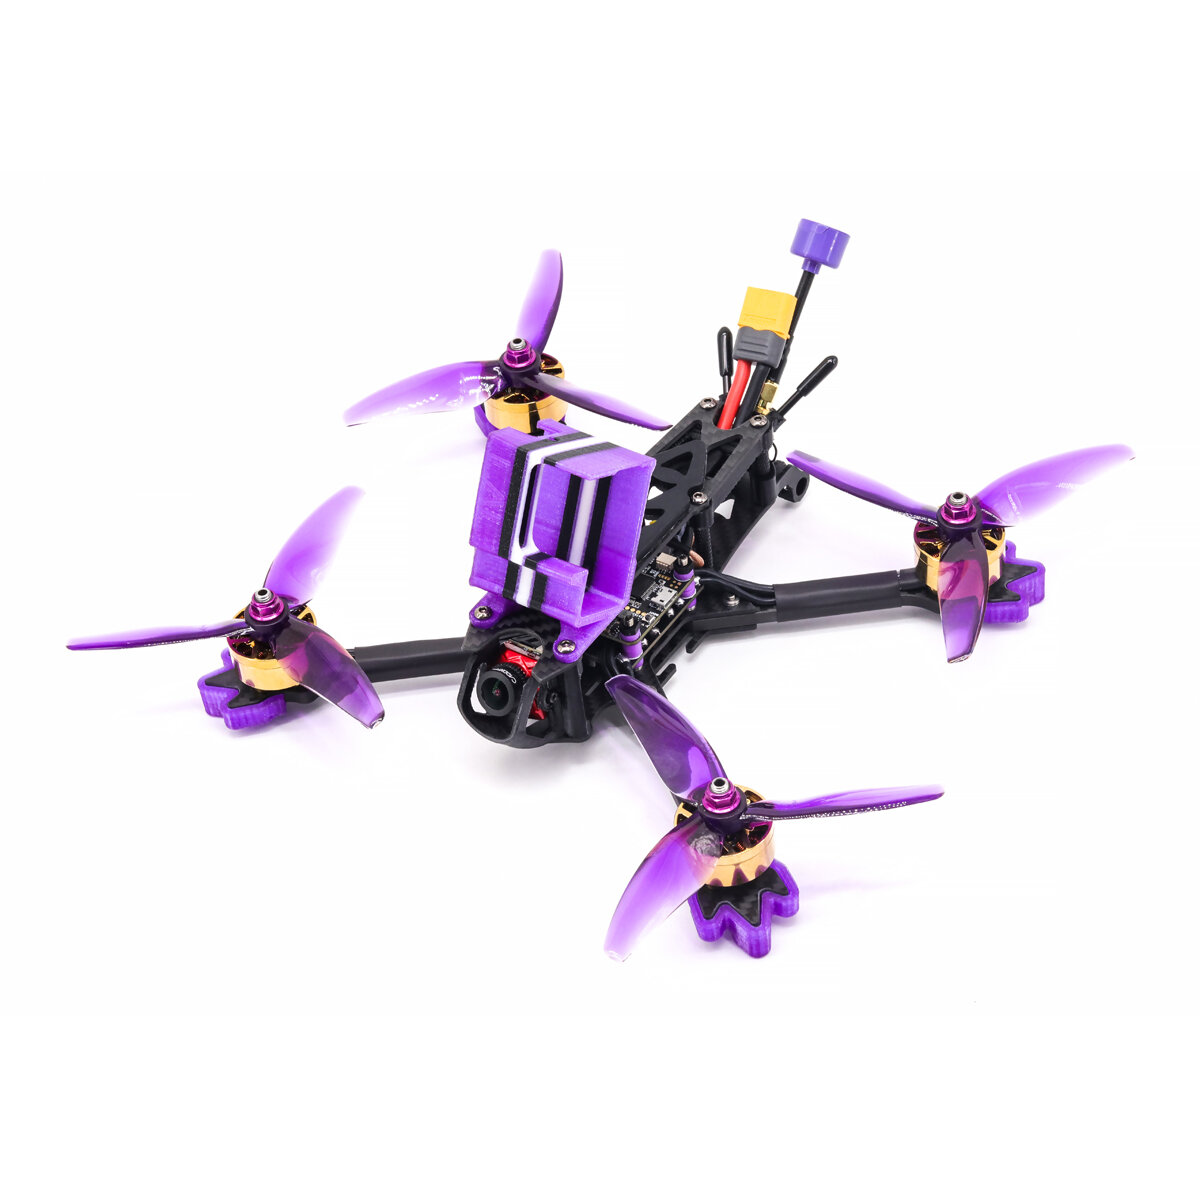 Eachine LAL 5style 220mm 6S Freestyle 5 Inch FPV Racing Drone PNP/BNF F4 Bluetooth FC Caddx Ratel 2307 1850KV Motor 50A